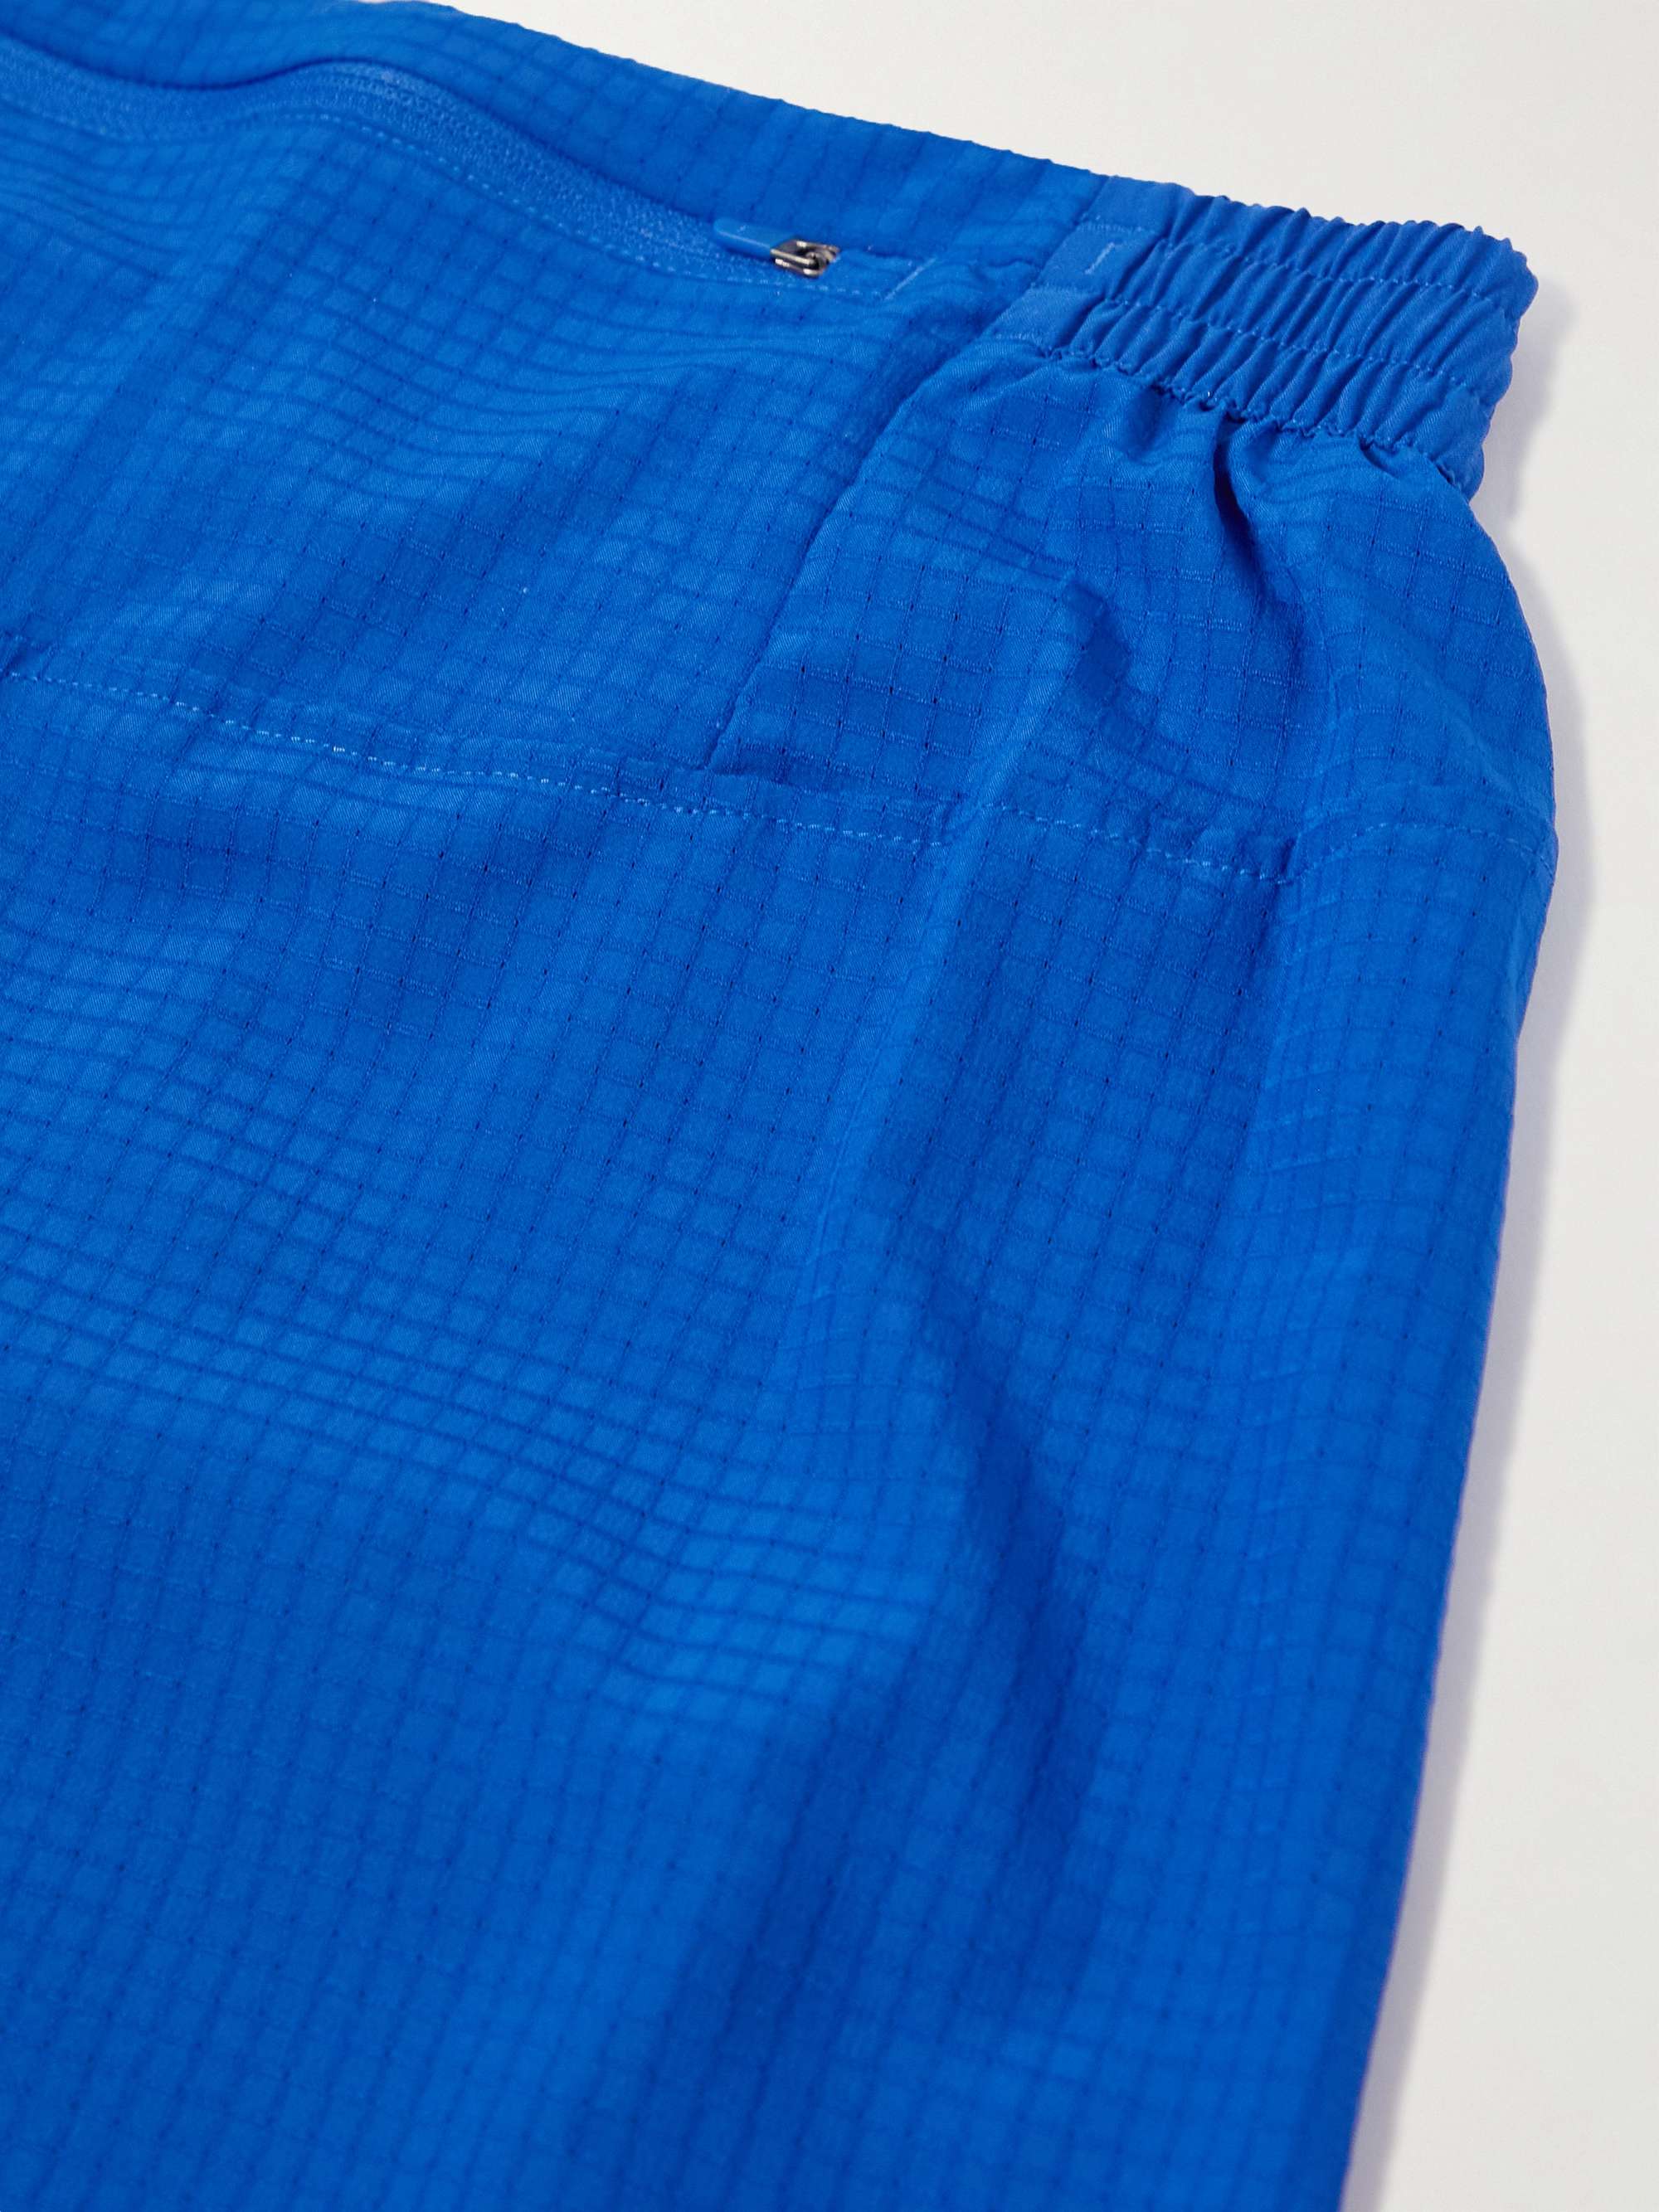 ADIDAS SPORT Designed 4 Running Recycled Shell and Mesh Shorts